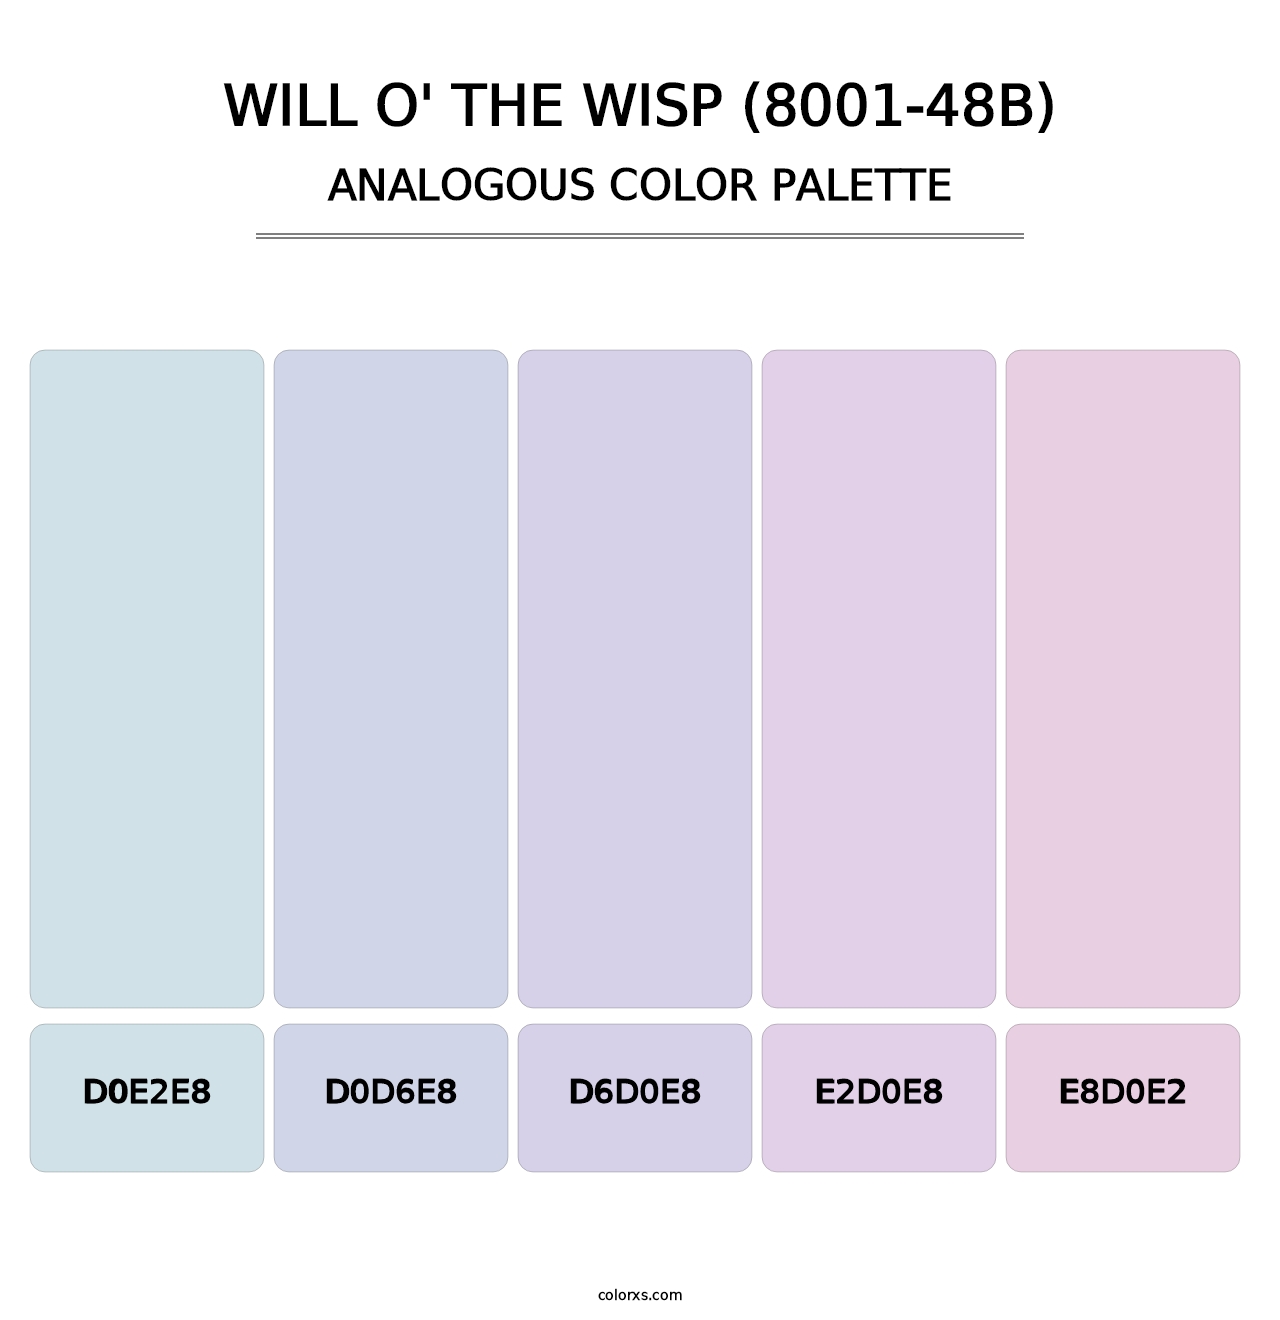 Will o' the Wisp (8001-48B) - Analogous Color Palette